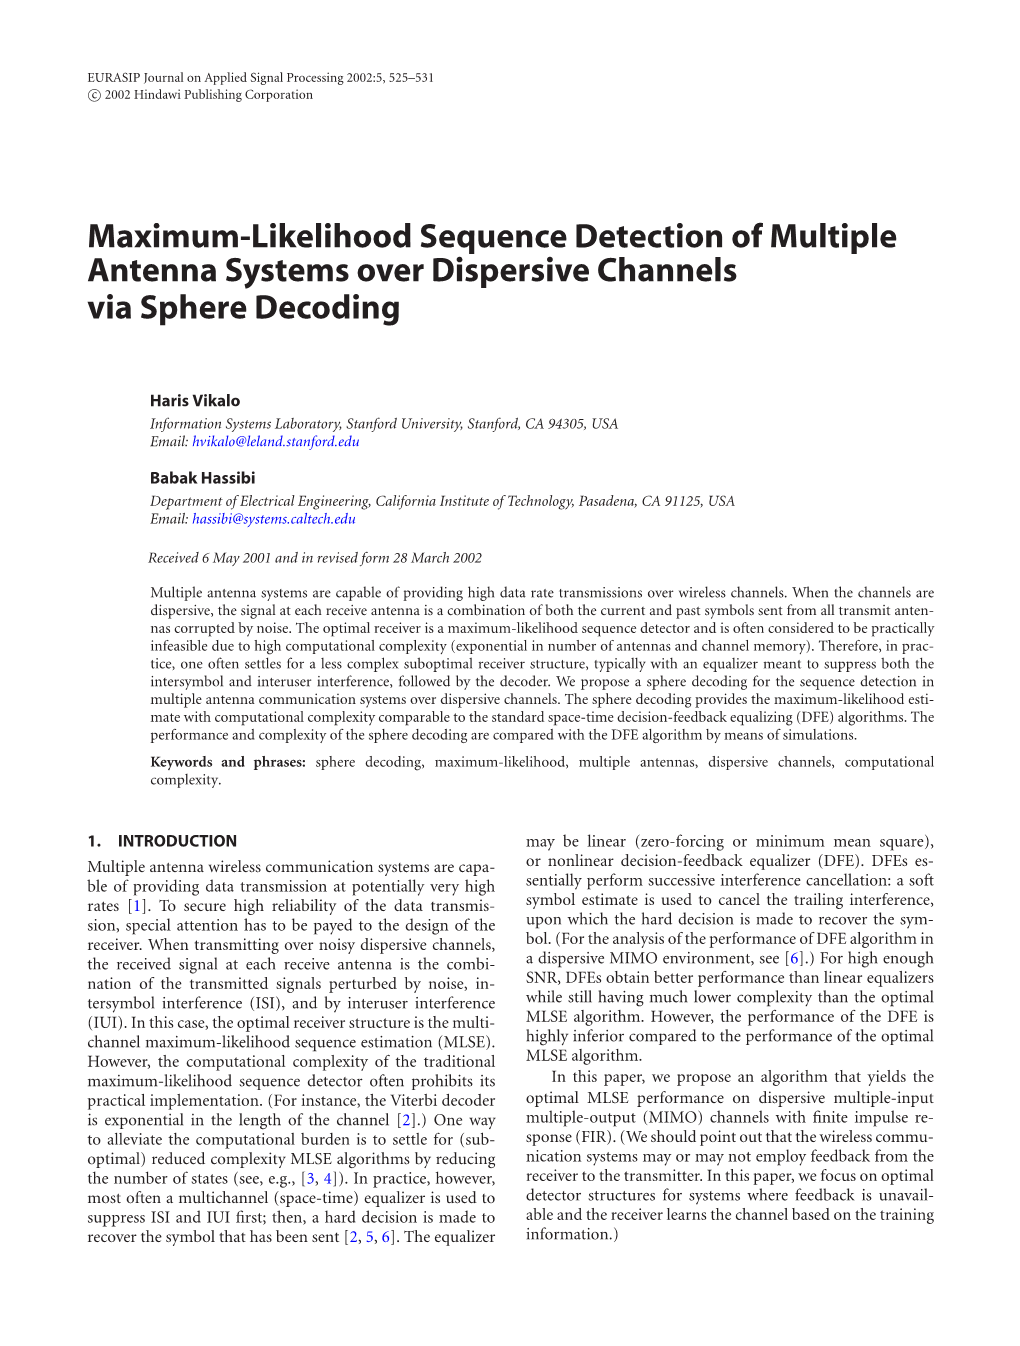 Maximum-Likelihood Sequence Detection of Multiple Antenna Systems Over Dispersive Channels Viaspheredecoding